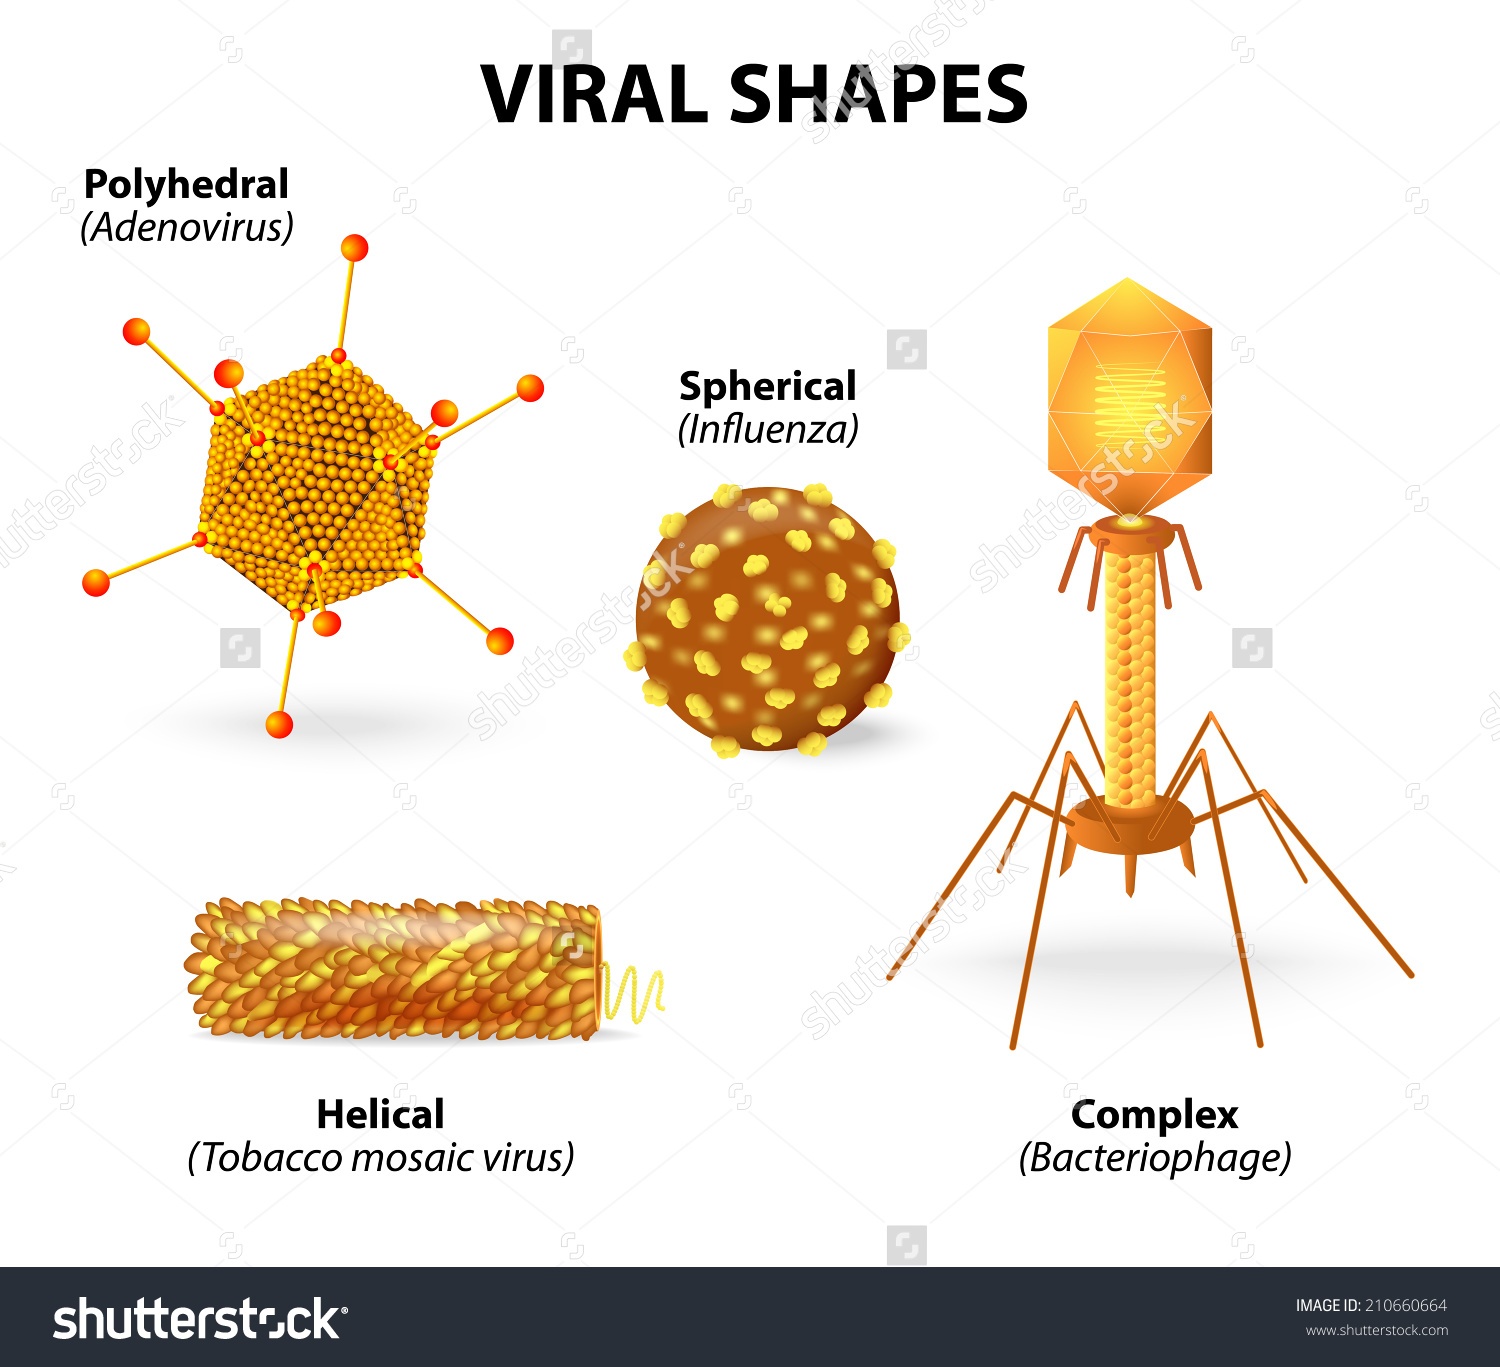 Viruses and Cells | Other - Quizizz